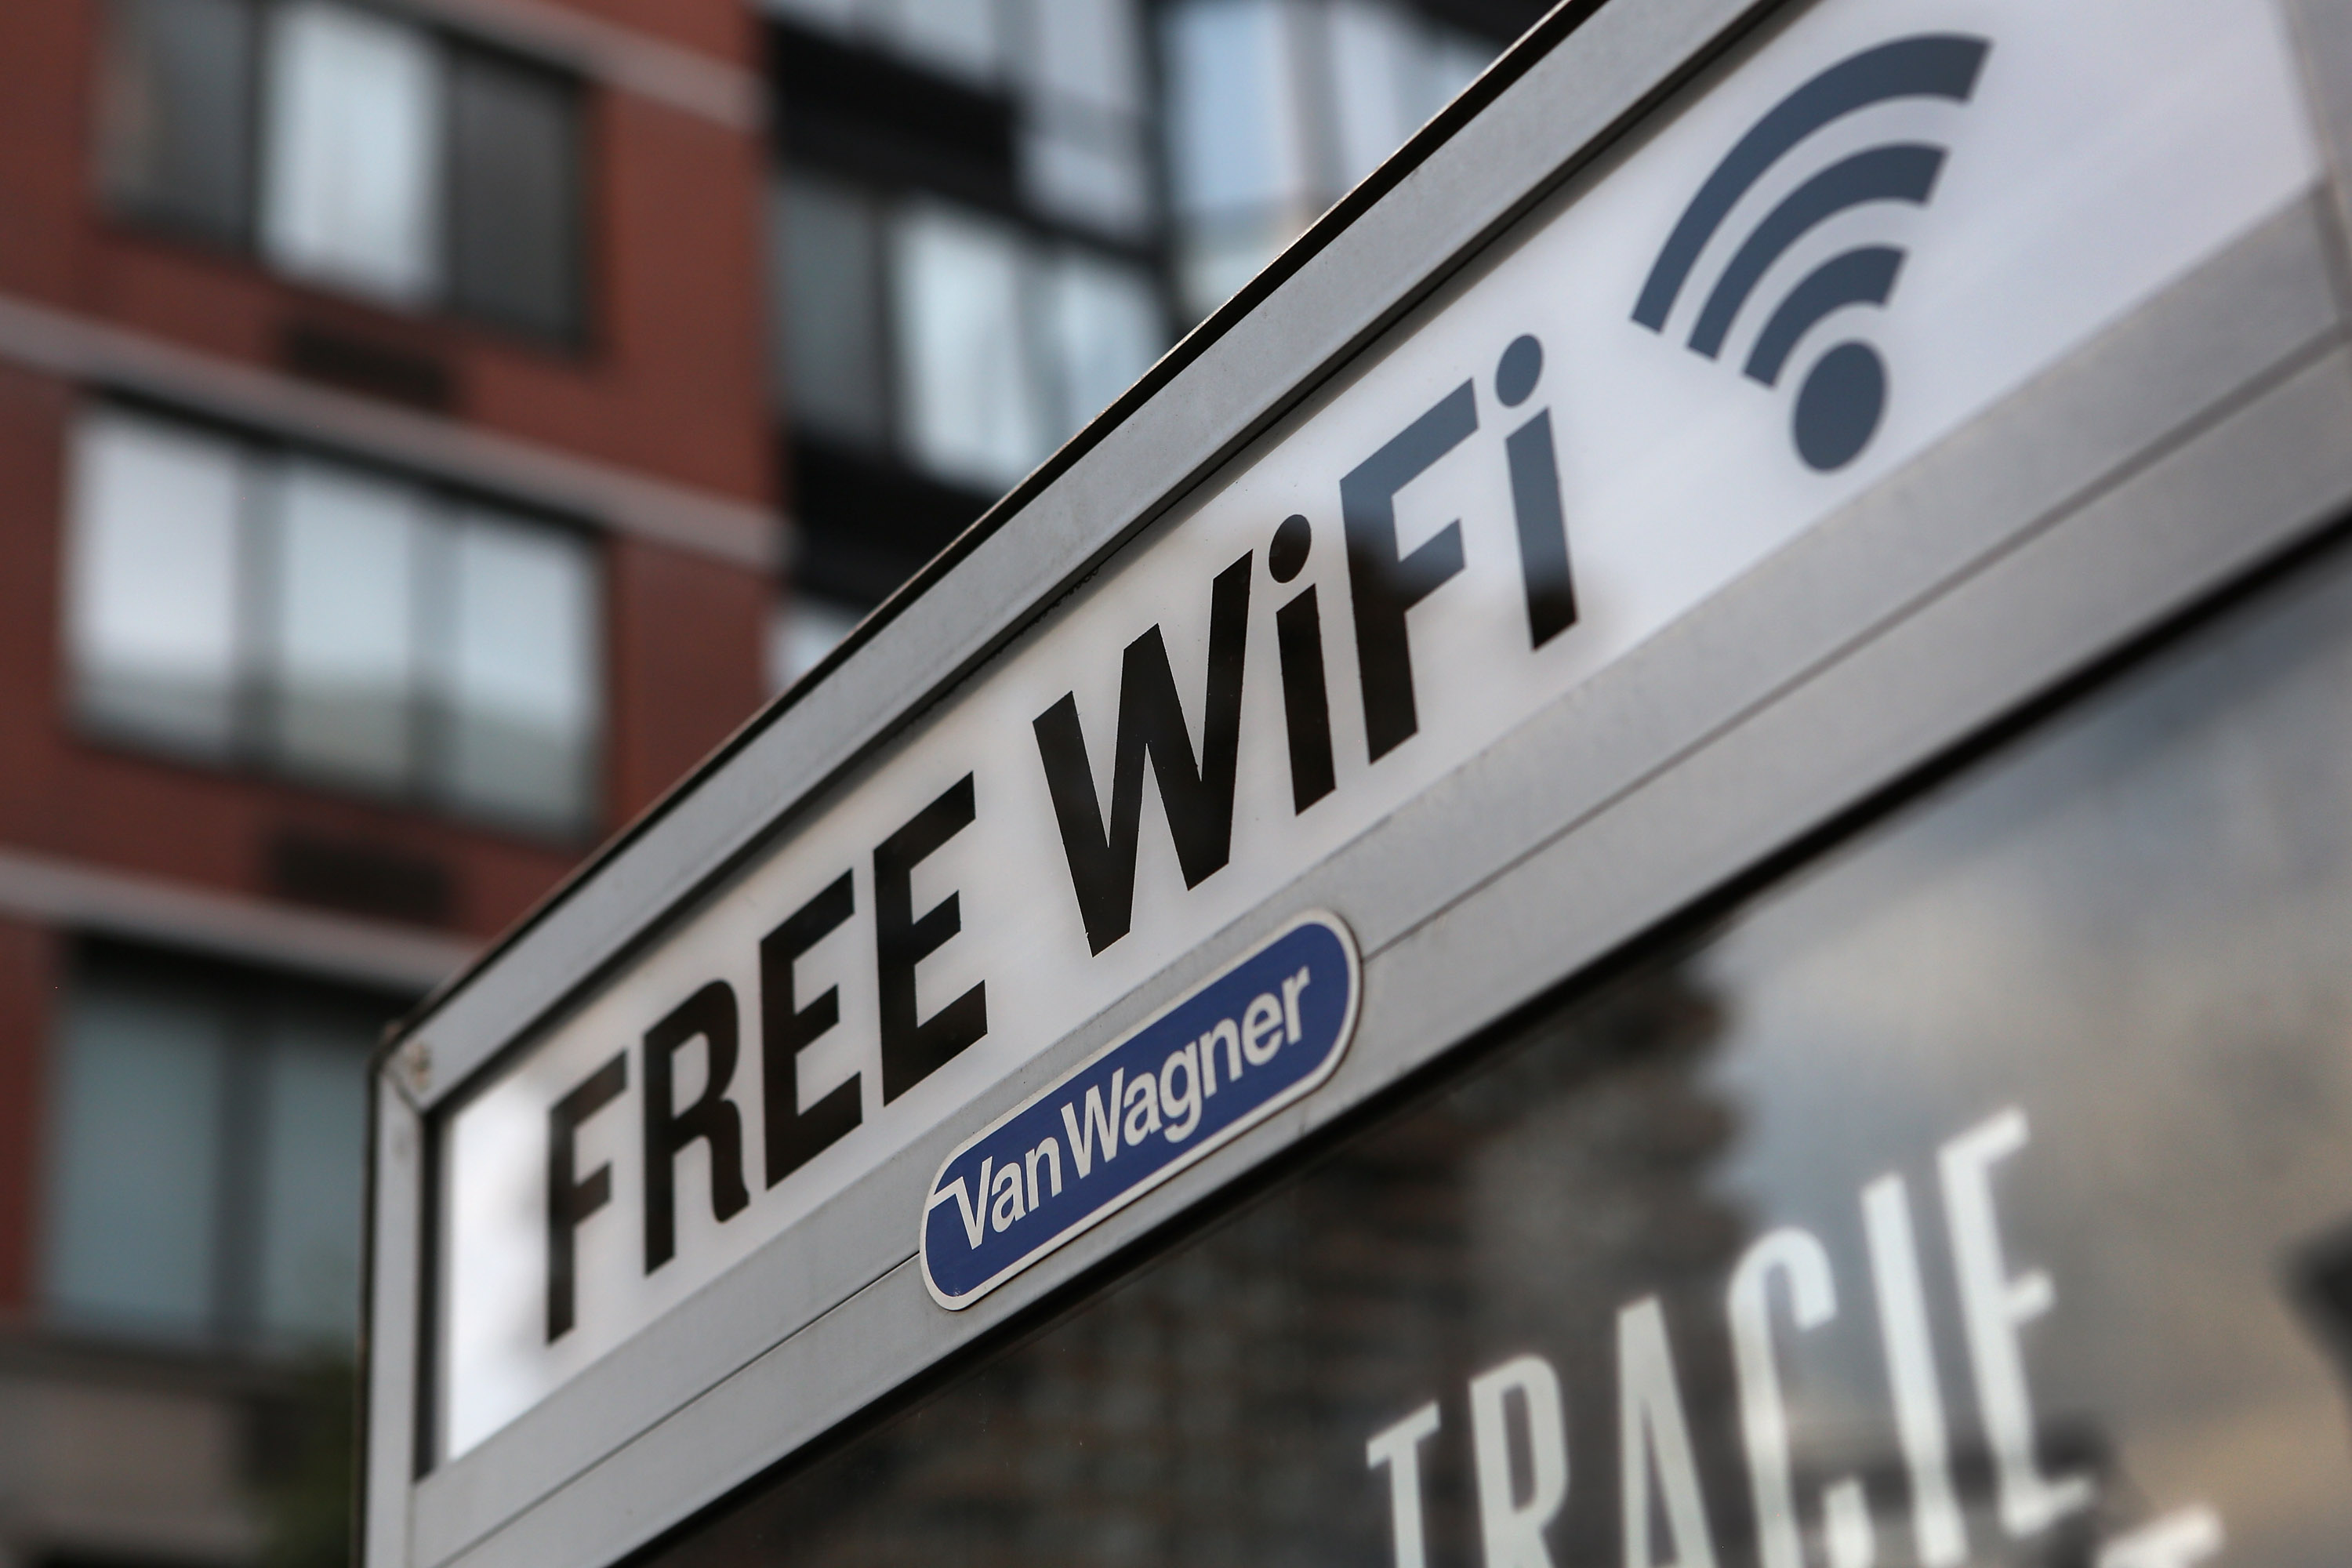 A free Wi-Fi hotspot beams broadband internet from atop a public phone booth on July 11, 2012 in Manhattan, New York City. (John Moore—Getty Images)